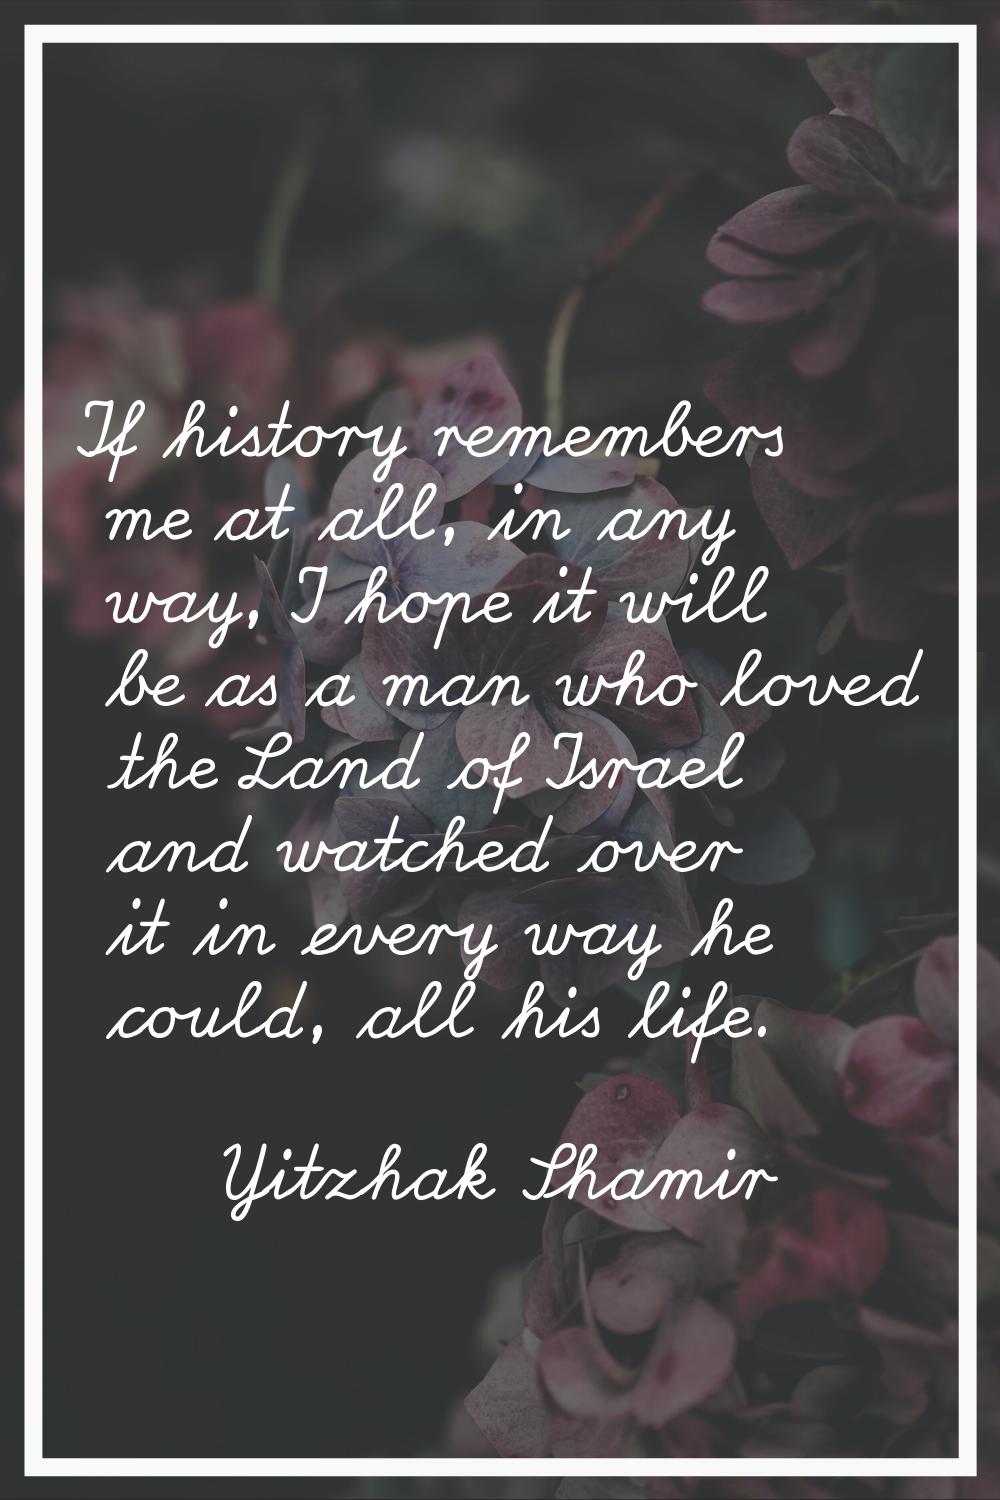 If history remembers me at all, in any way, I hope it will be as a man who loved the Land of Israel